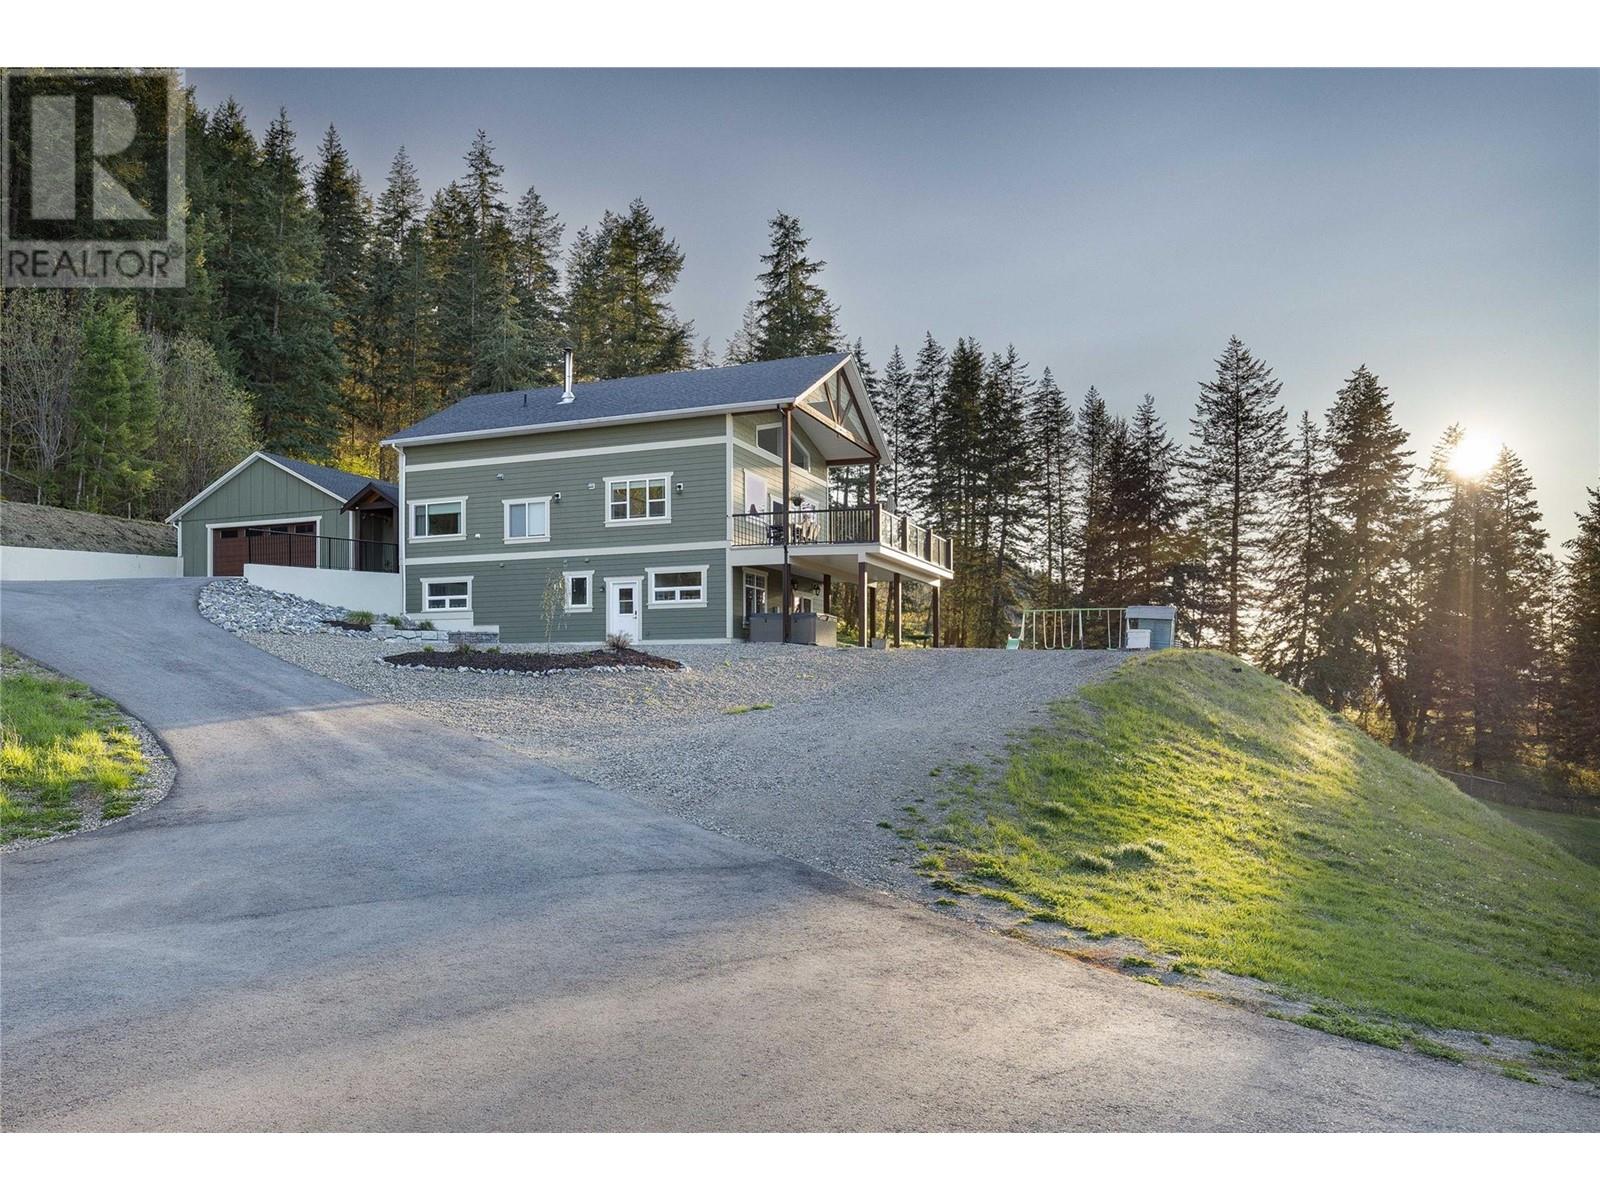  7090 Brewer Road, Coldstream